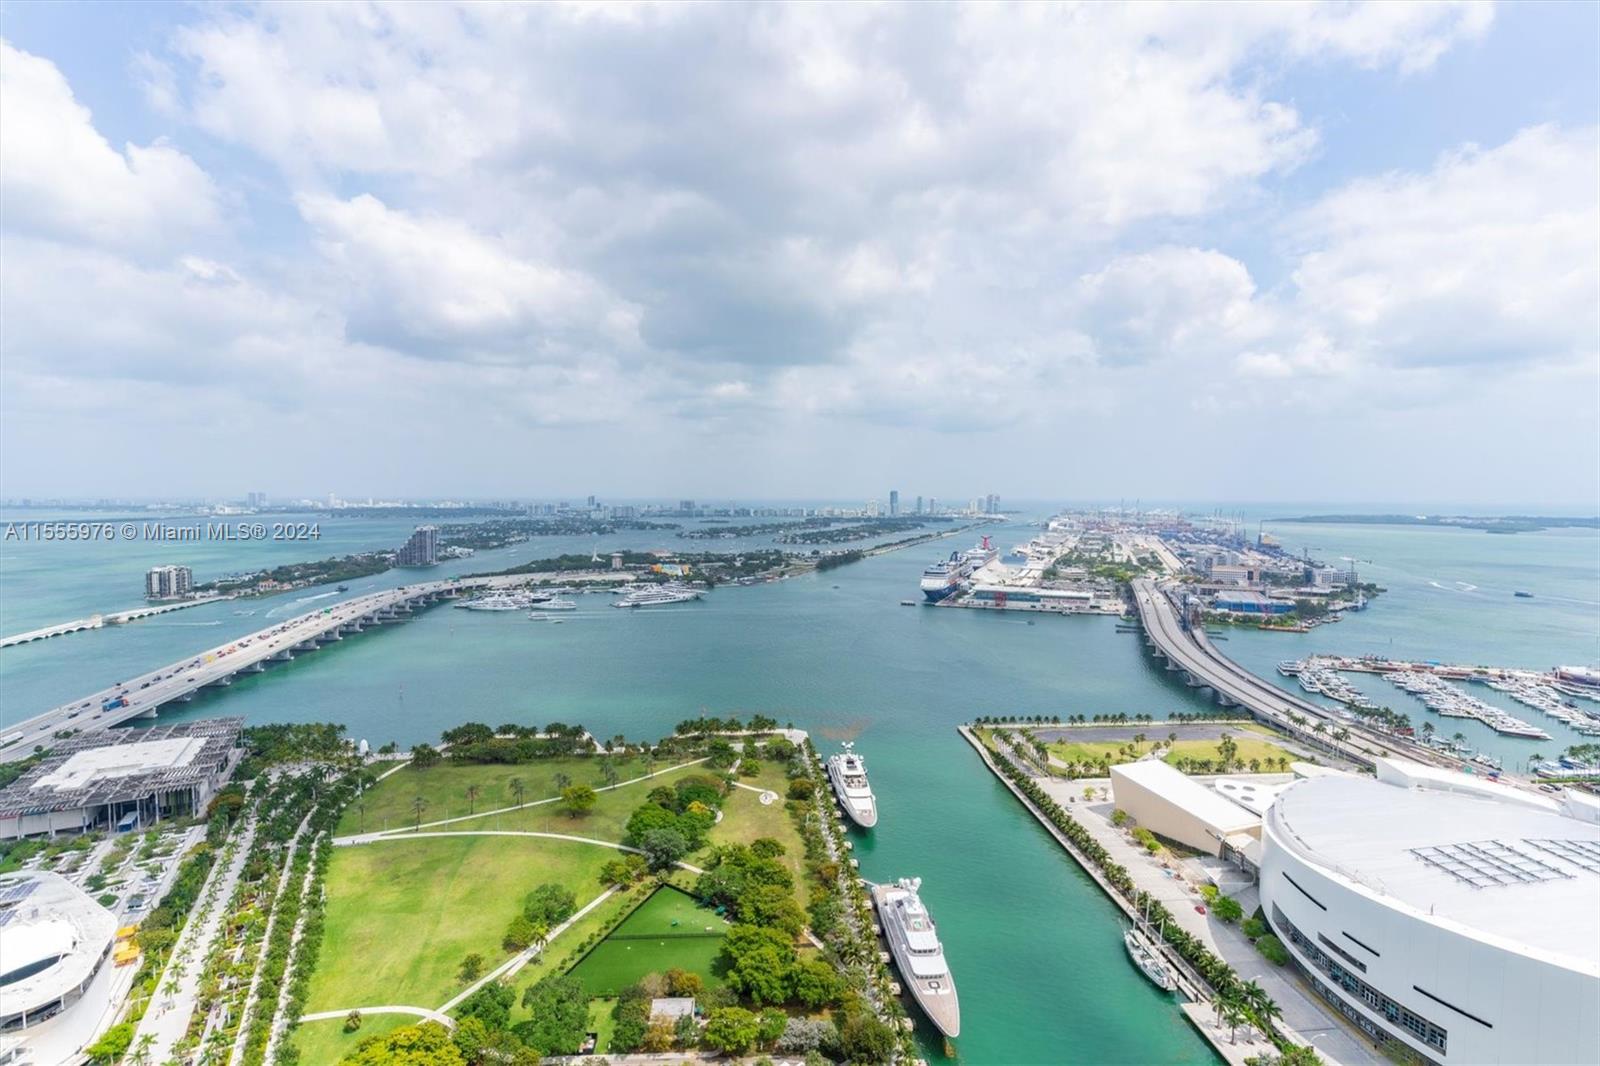 This stunning 2 bedroom + Den (den has been closed to make a third bedroom) / 3 bathroom apartment at 900 Biscayne Bay offers breathtaking views of the bay, ocean, and city! The private foyer entrance leads to a spacious living area great for entertaining. Being a flow through unit this apartment offers both sunrise and sunset views. Located in the heart of Downtown, just minutes away from Miami Beach, Brickell, Midtown and others! The building offers its residents numerous amenities including gym, sauna, locker room, massage treatment rooms, meeting rooms, theater, children's play room, yoga and aerobics room. Don't miss out on this luxurious living experience!